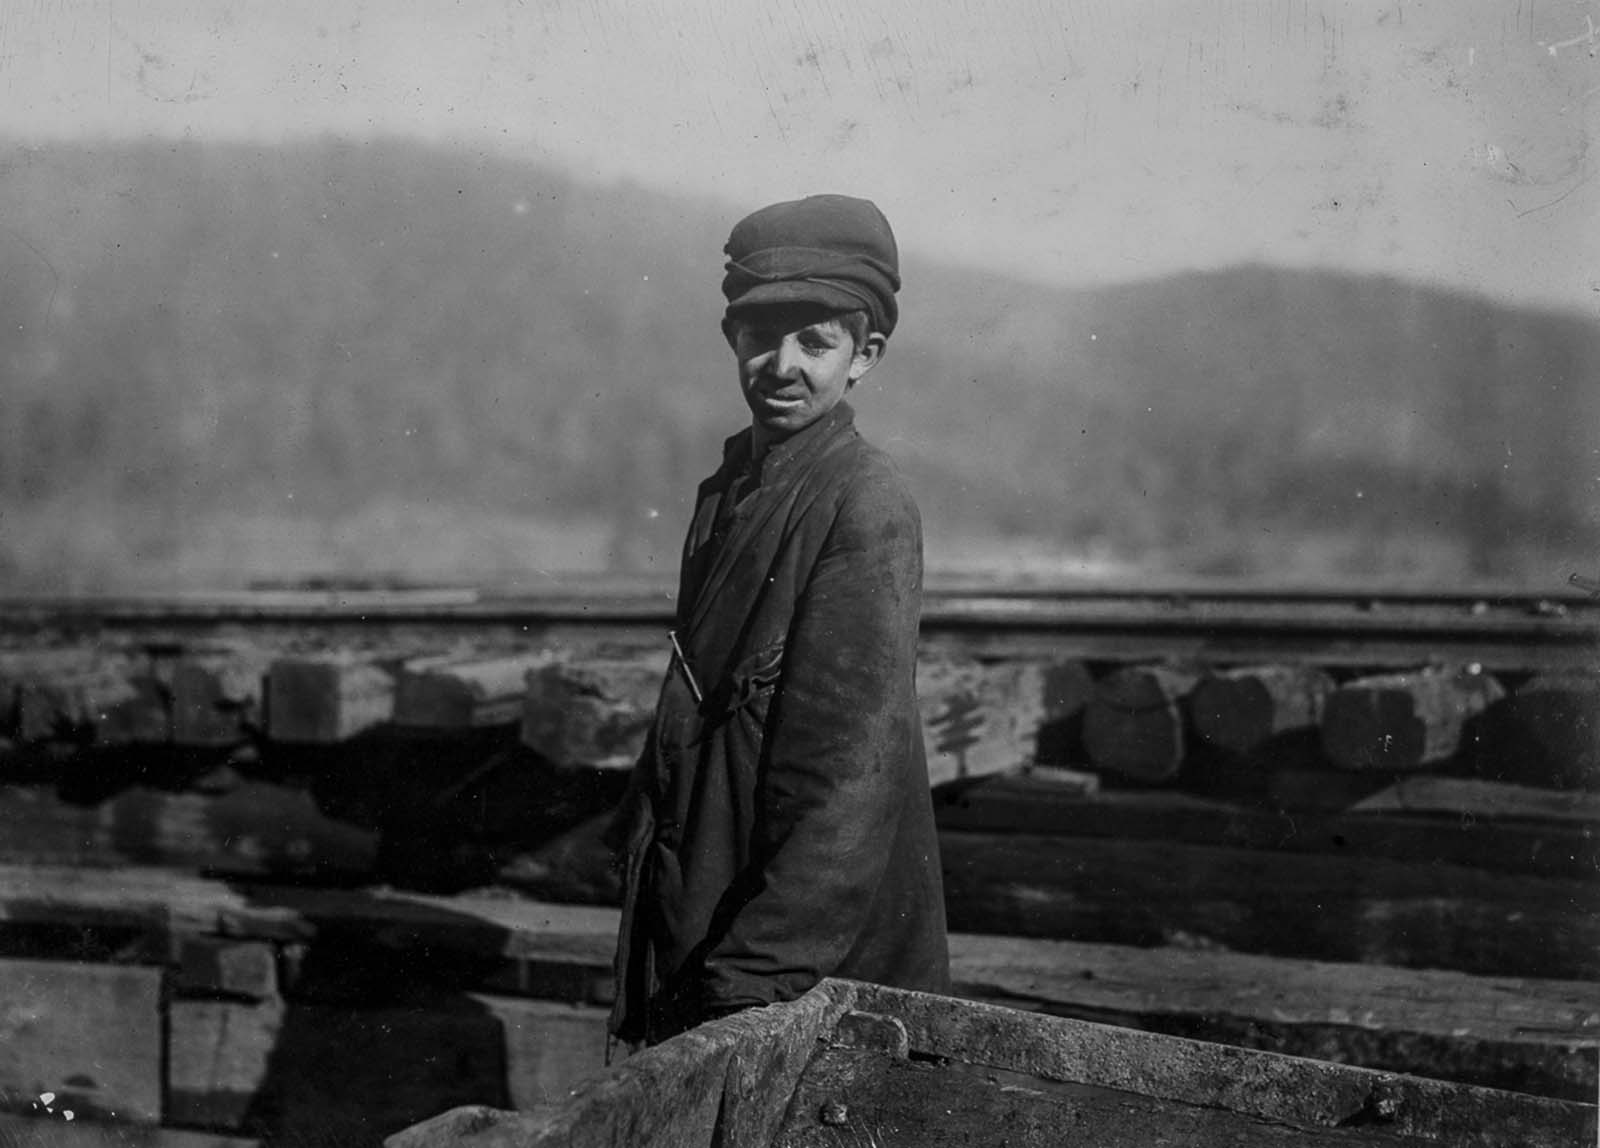 Harley Bruce, a worker at Indian Mountain Mine in Tennessee, 1910